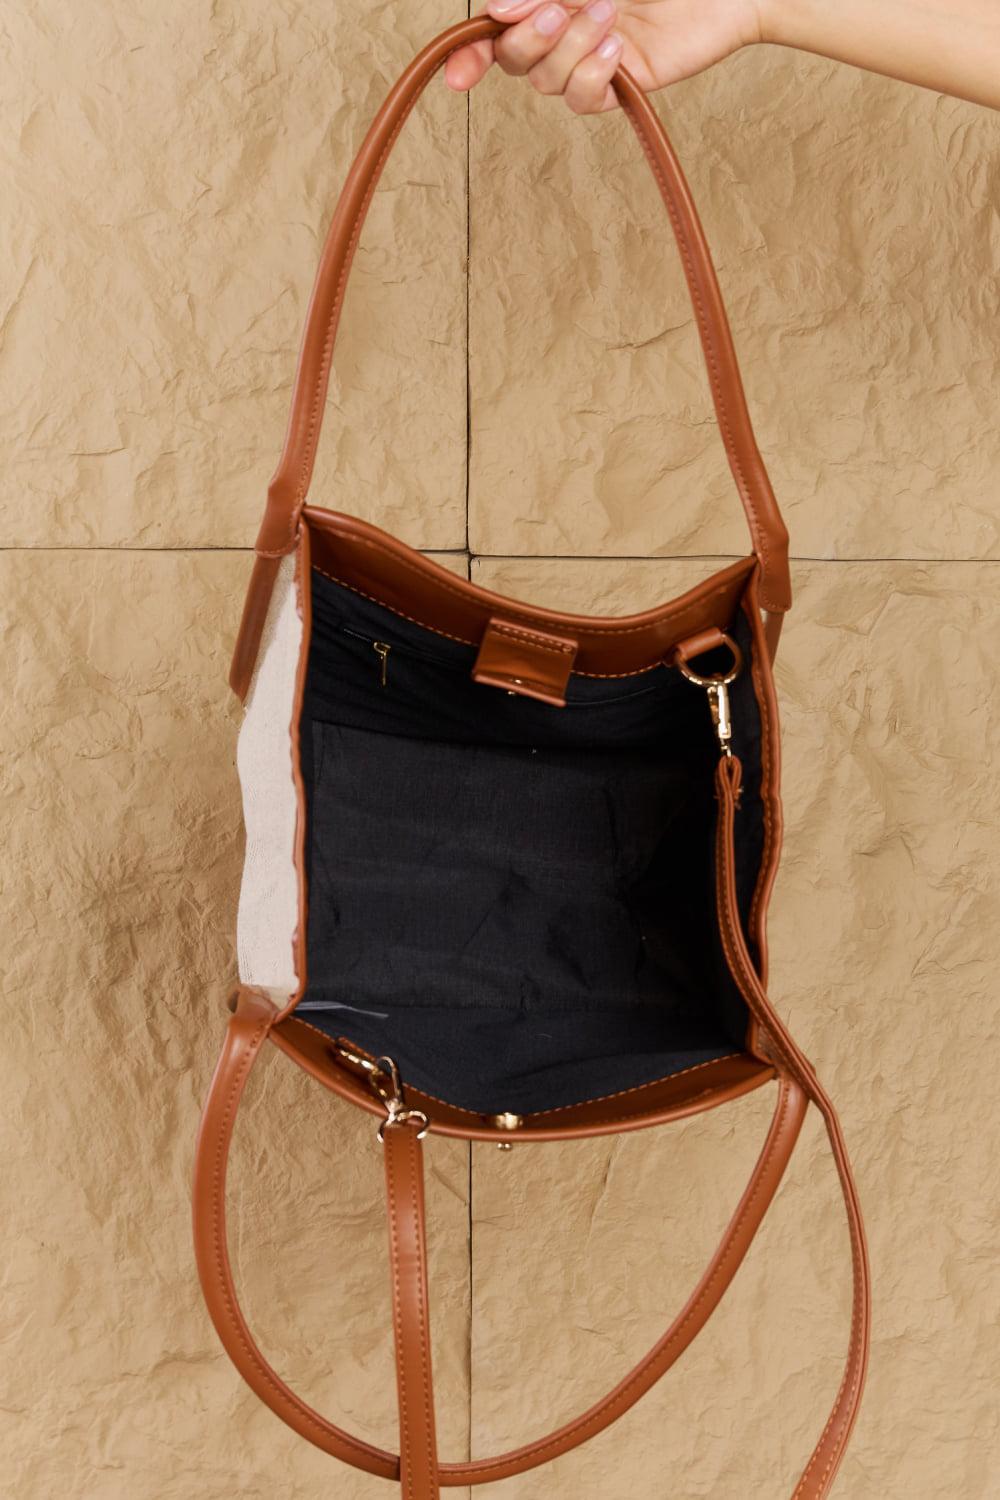 Fame Beach Chic Faux Leather Trim Tote Bag in Ochre BLUE ZONE PLANET